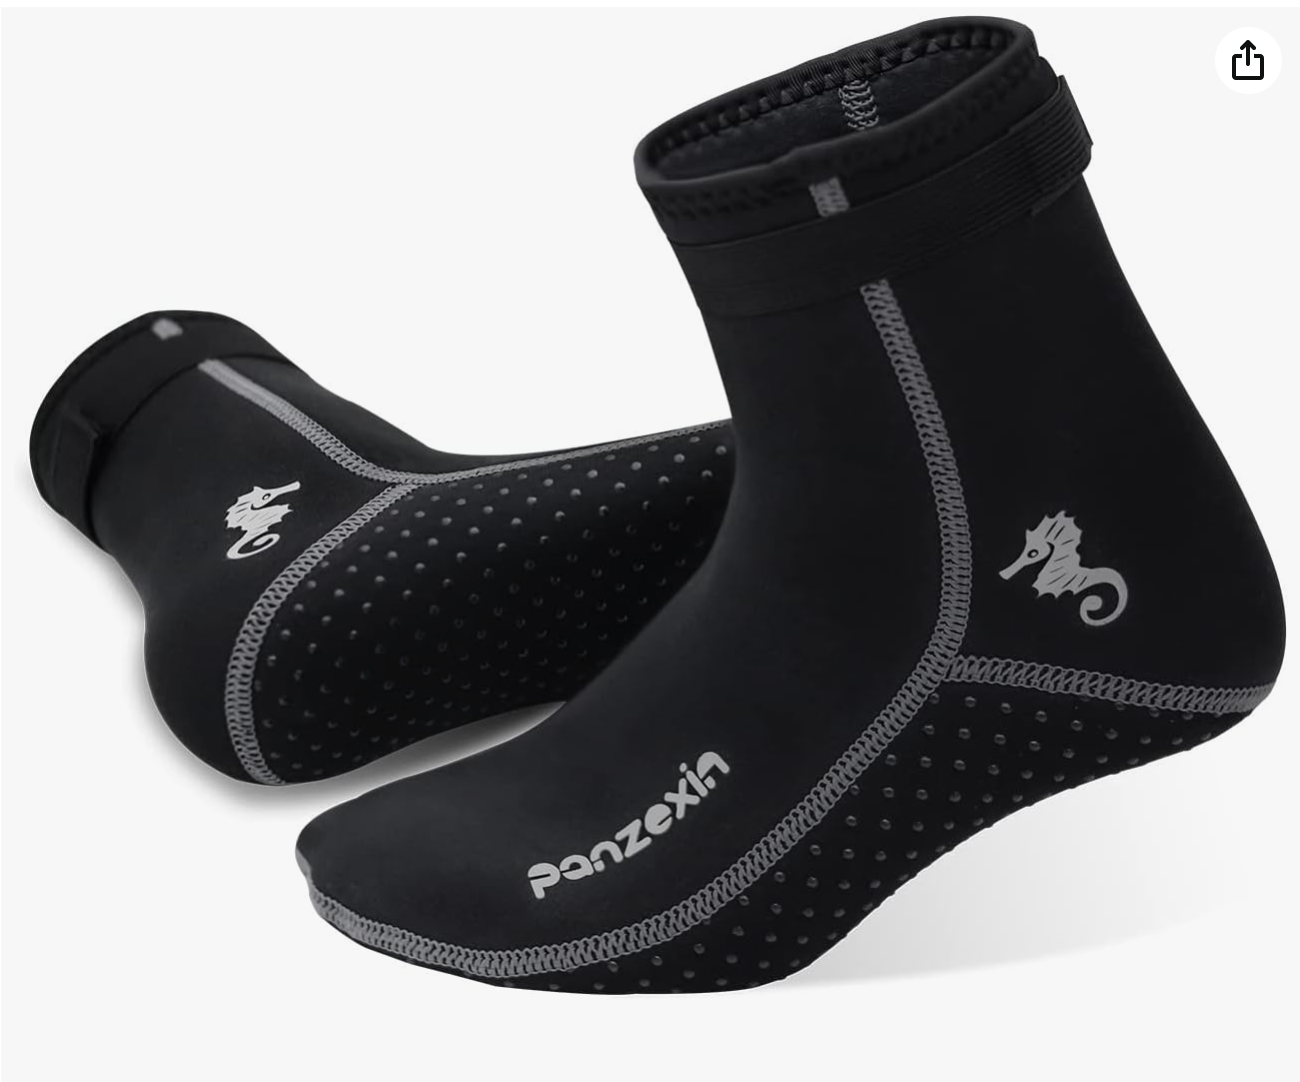 Neoprene socks used to keep feet warm while swimming in cold water.